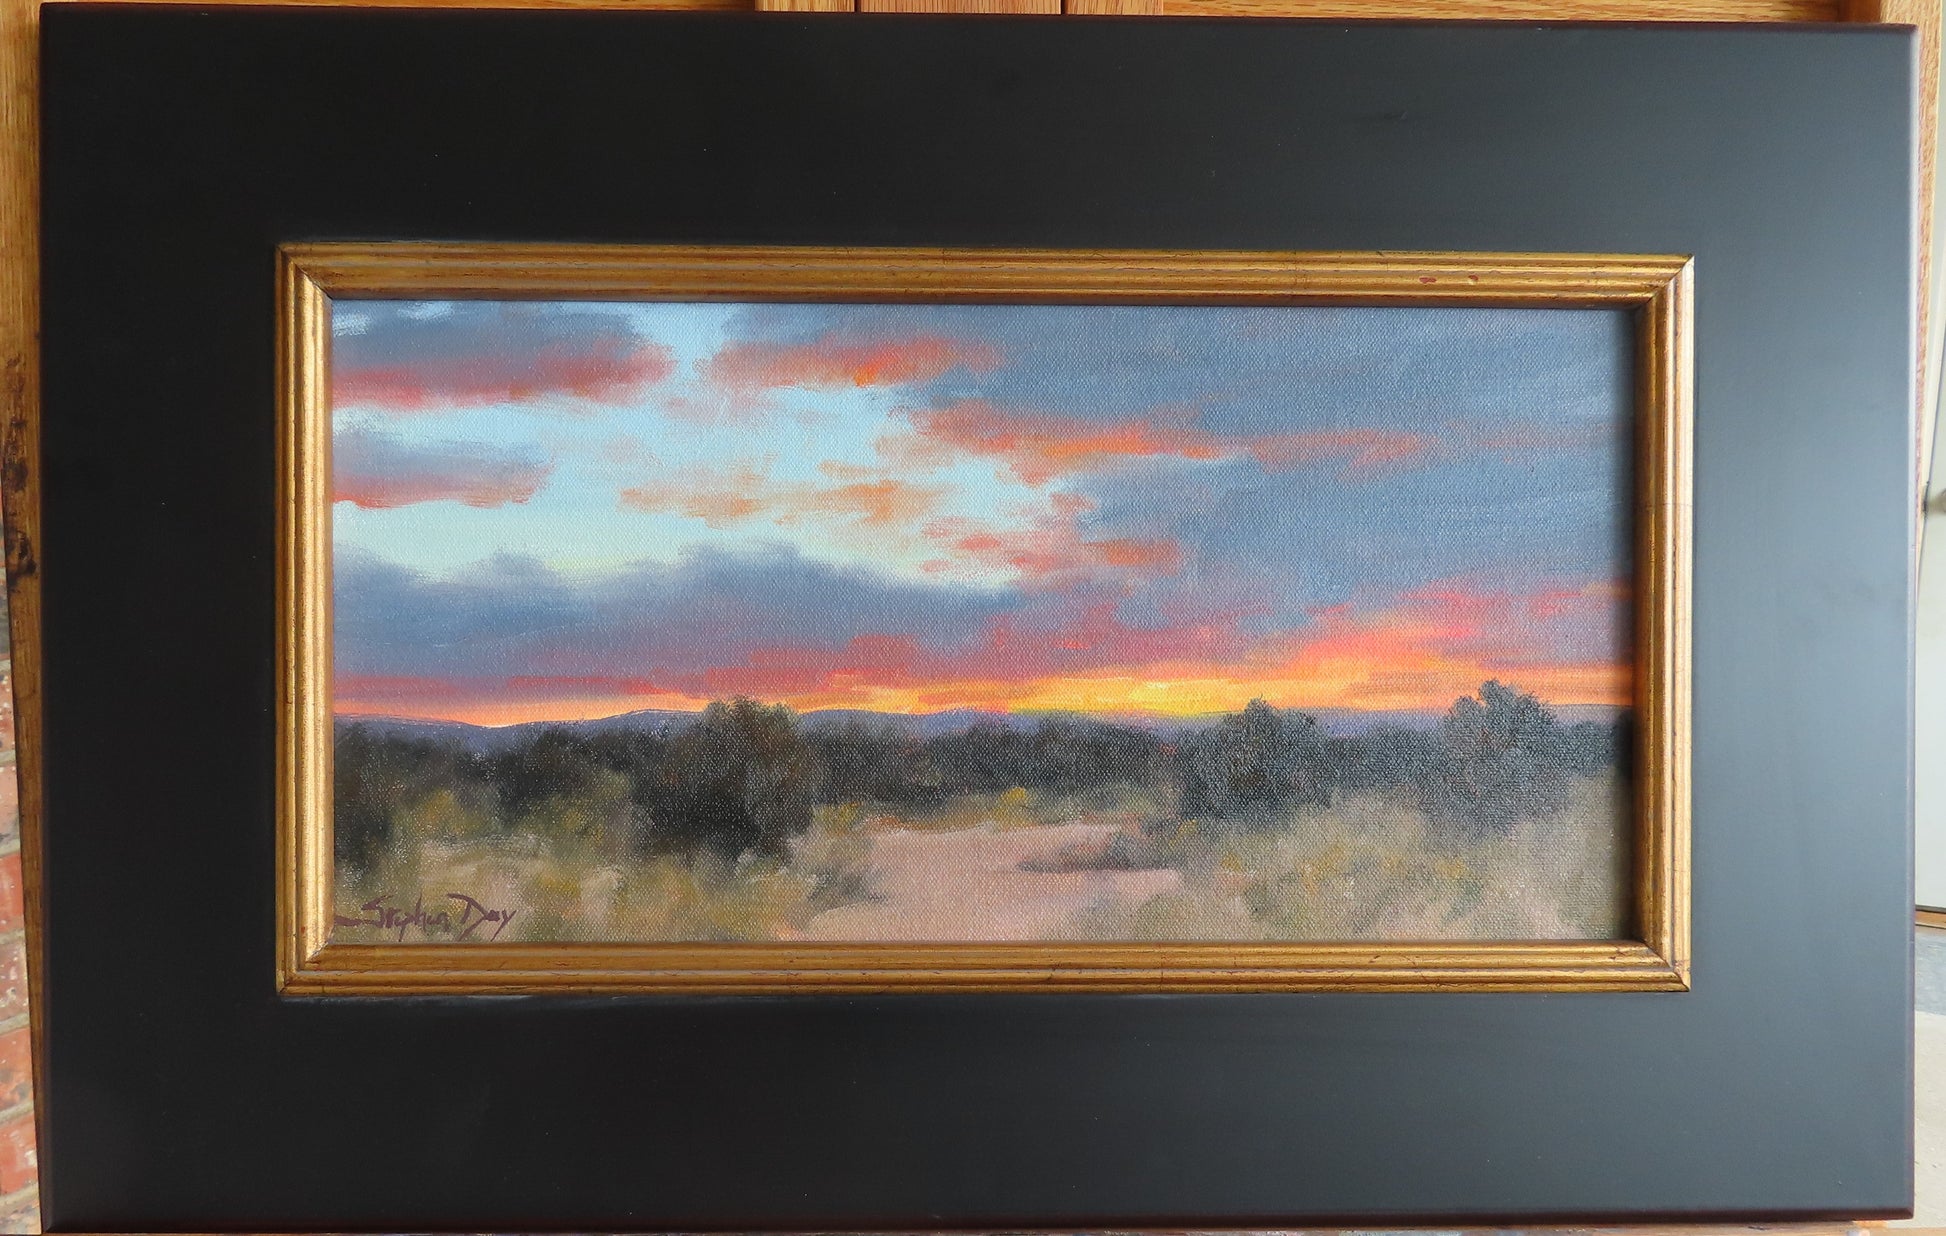 An Evening Moment-painting-Stephen Day-Sorrel Sky Gallery